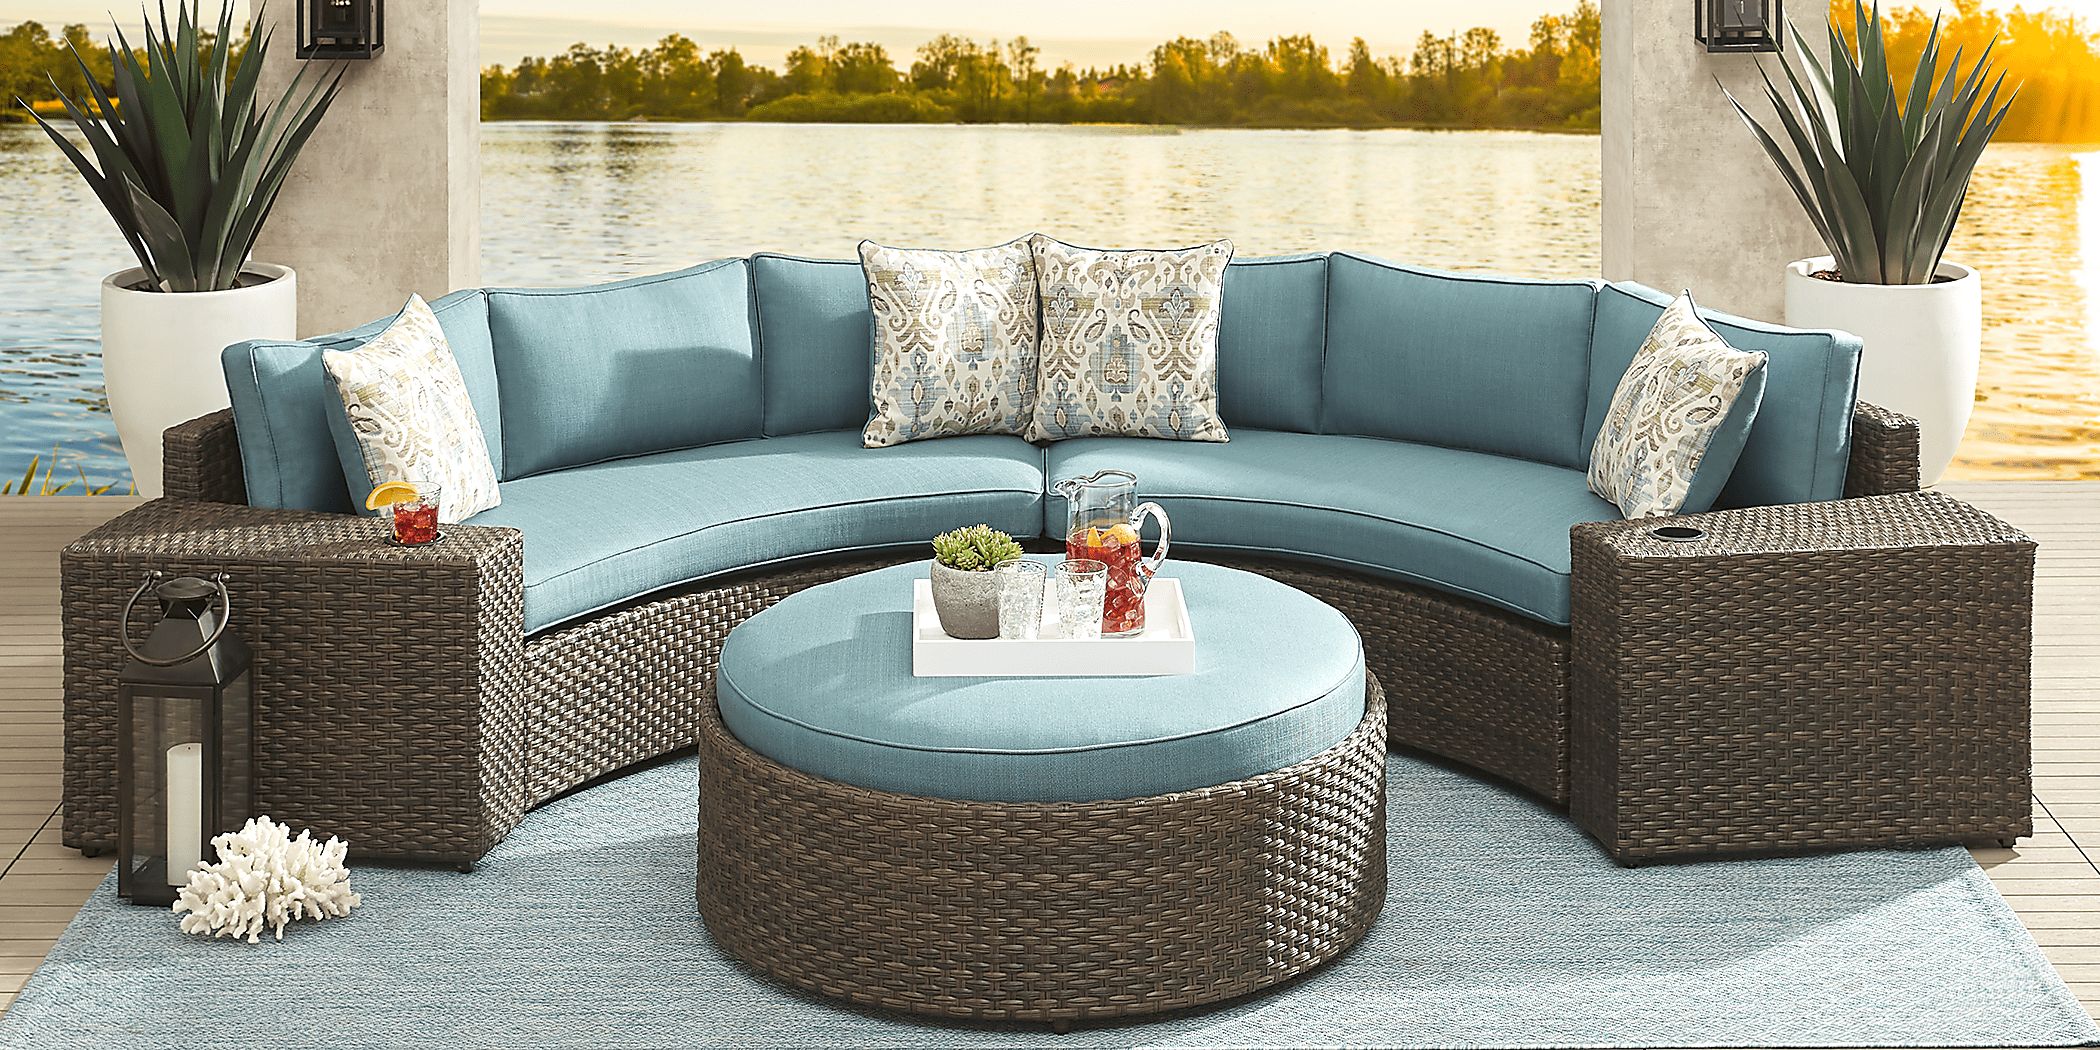 Rialto Brown 4 Pc Curved Outdoor Sectional with Aqua Cushions